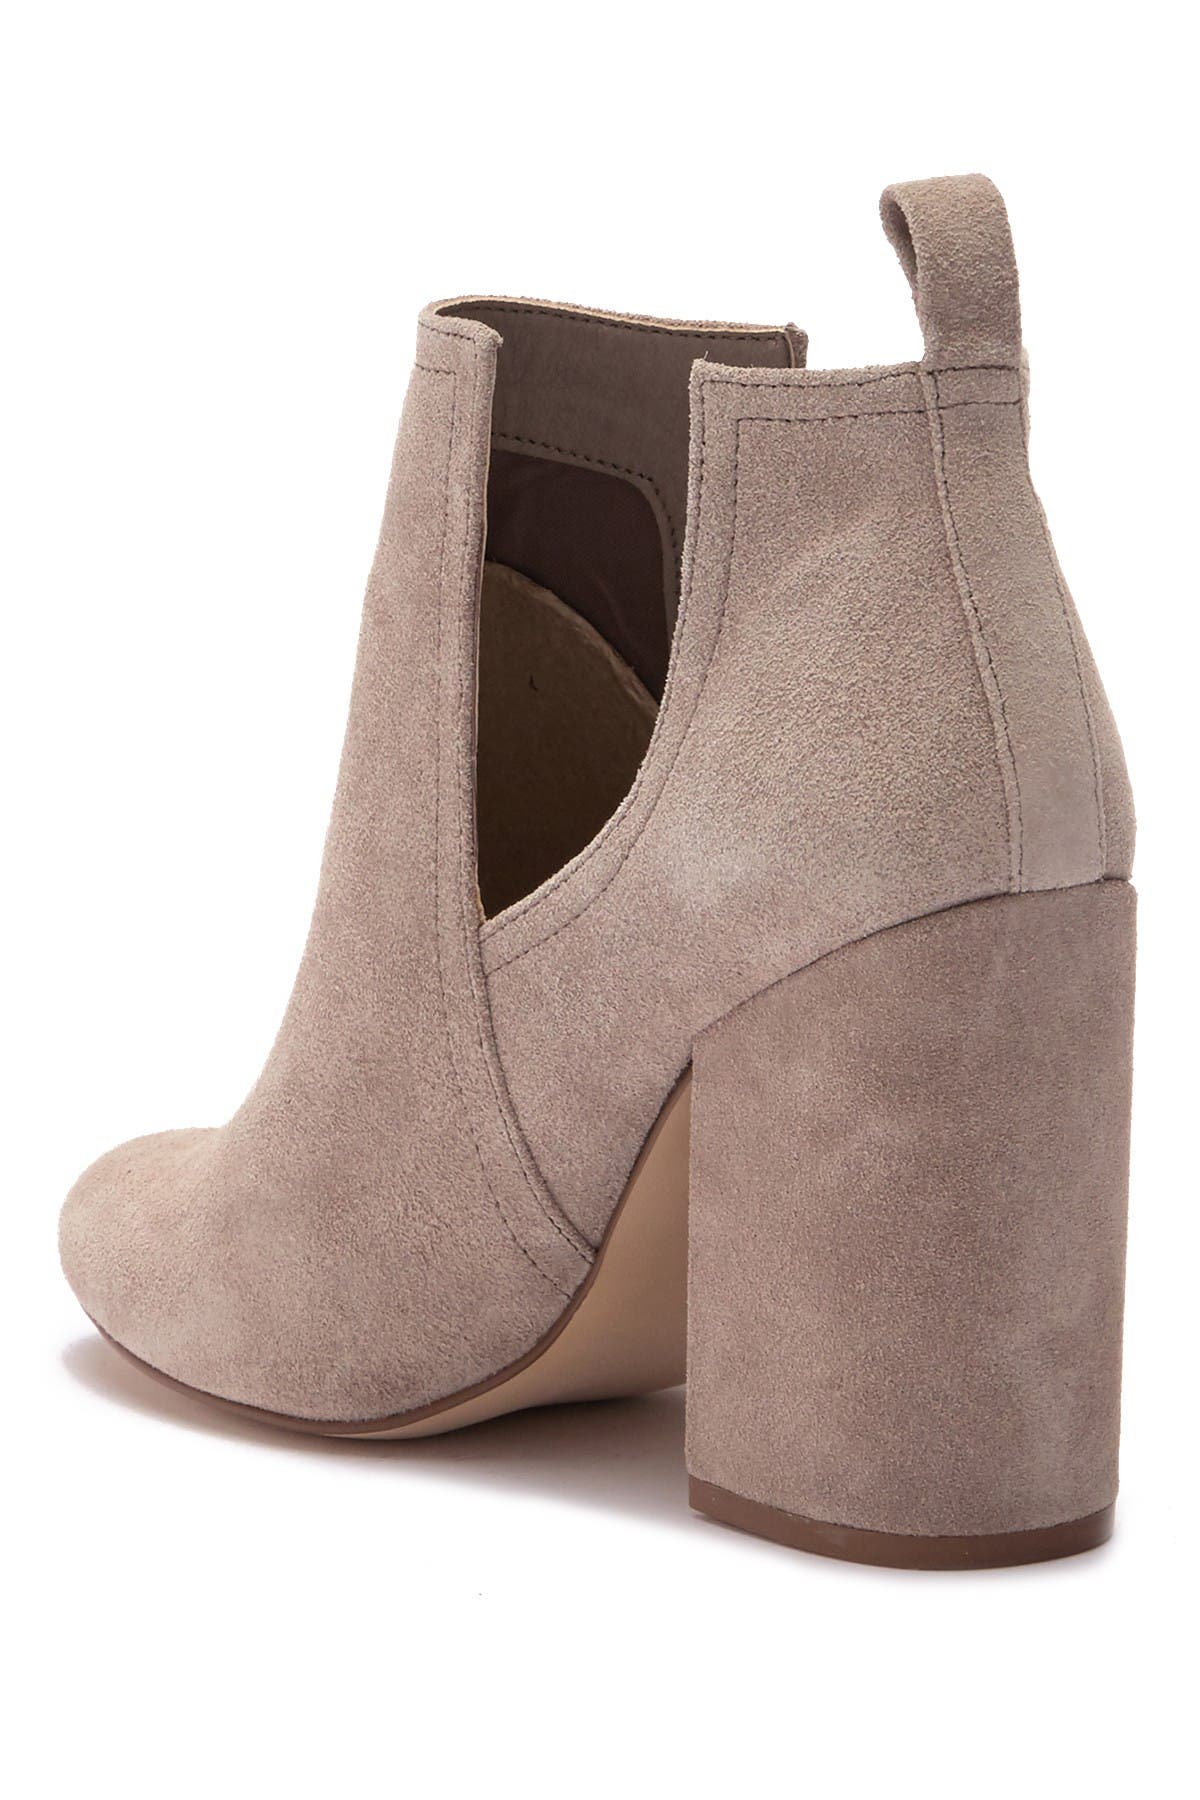 Steve Madden | Norelle Suede Ankle Boot 